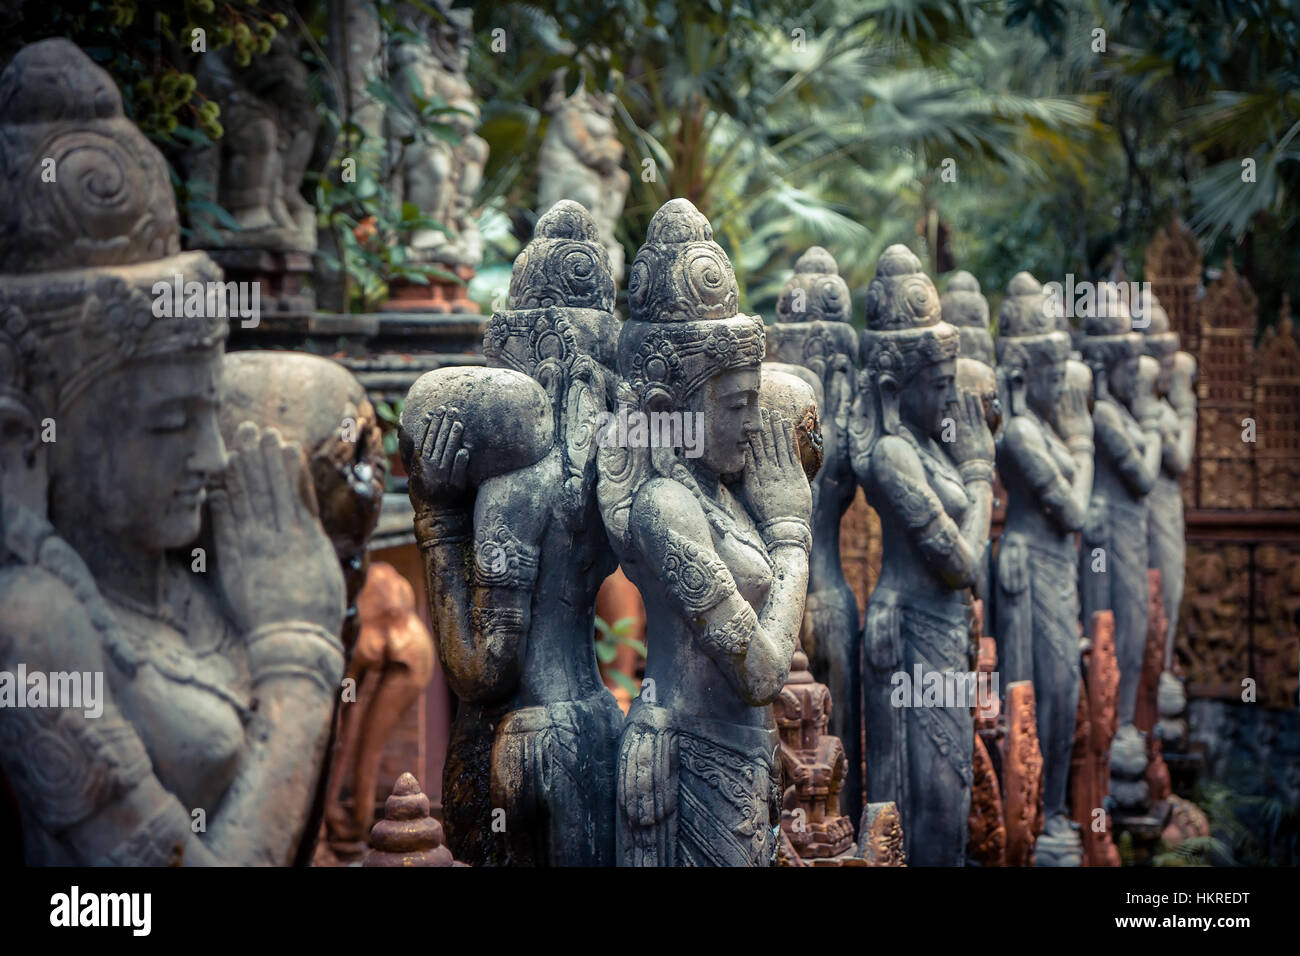 Traditional Asian sculptures of Buddhism deities in vintage style in tropical garden illustrating Asian culture and Asian carvin Stock Photo